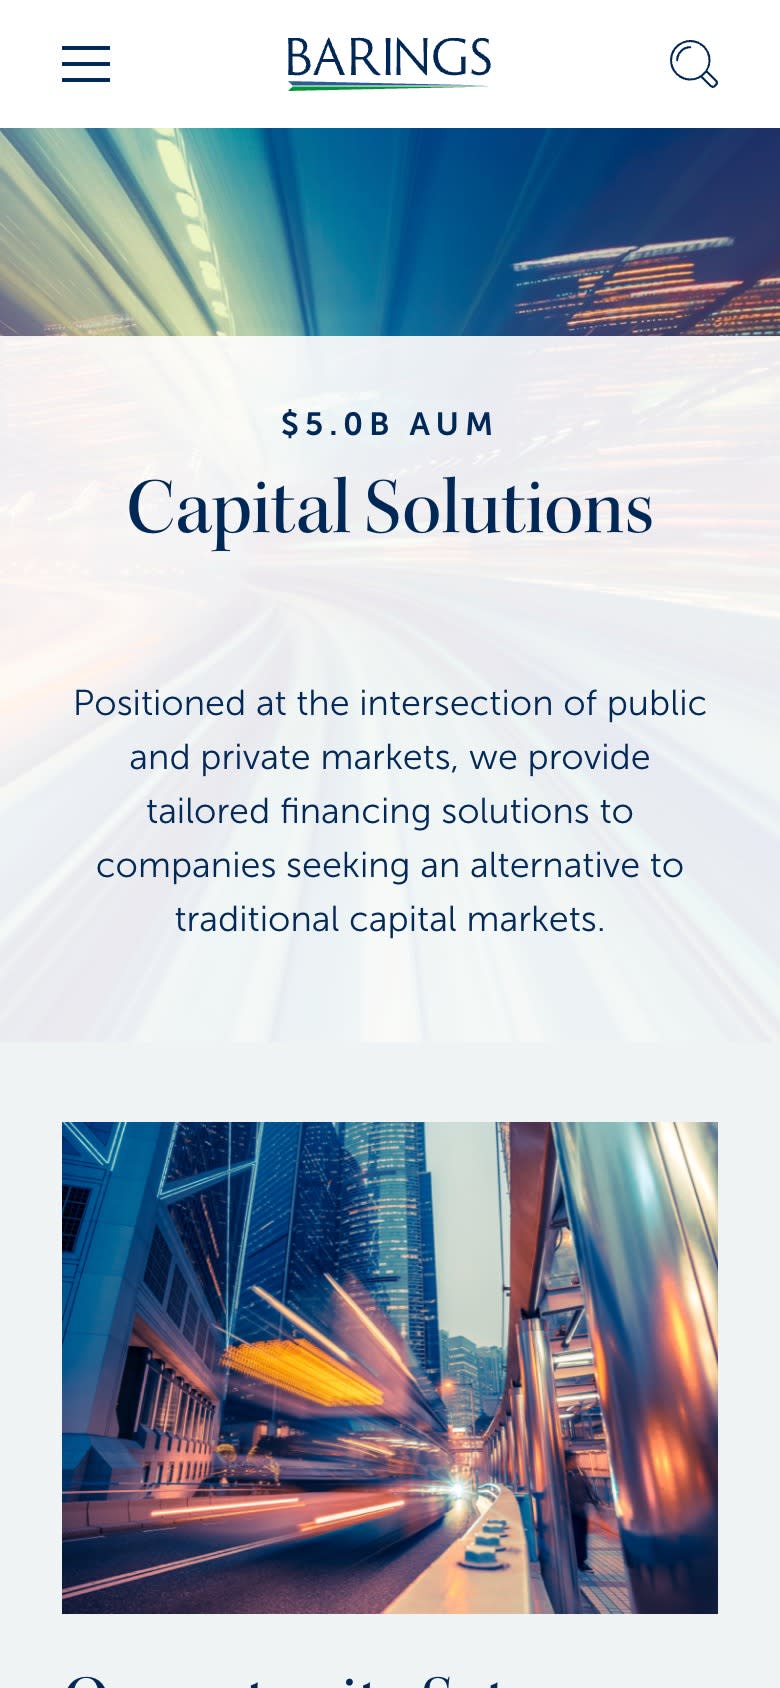 Barings-Capital-Solutions-Mobile